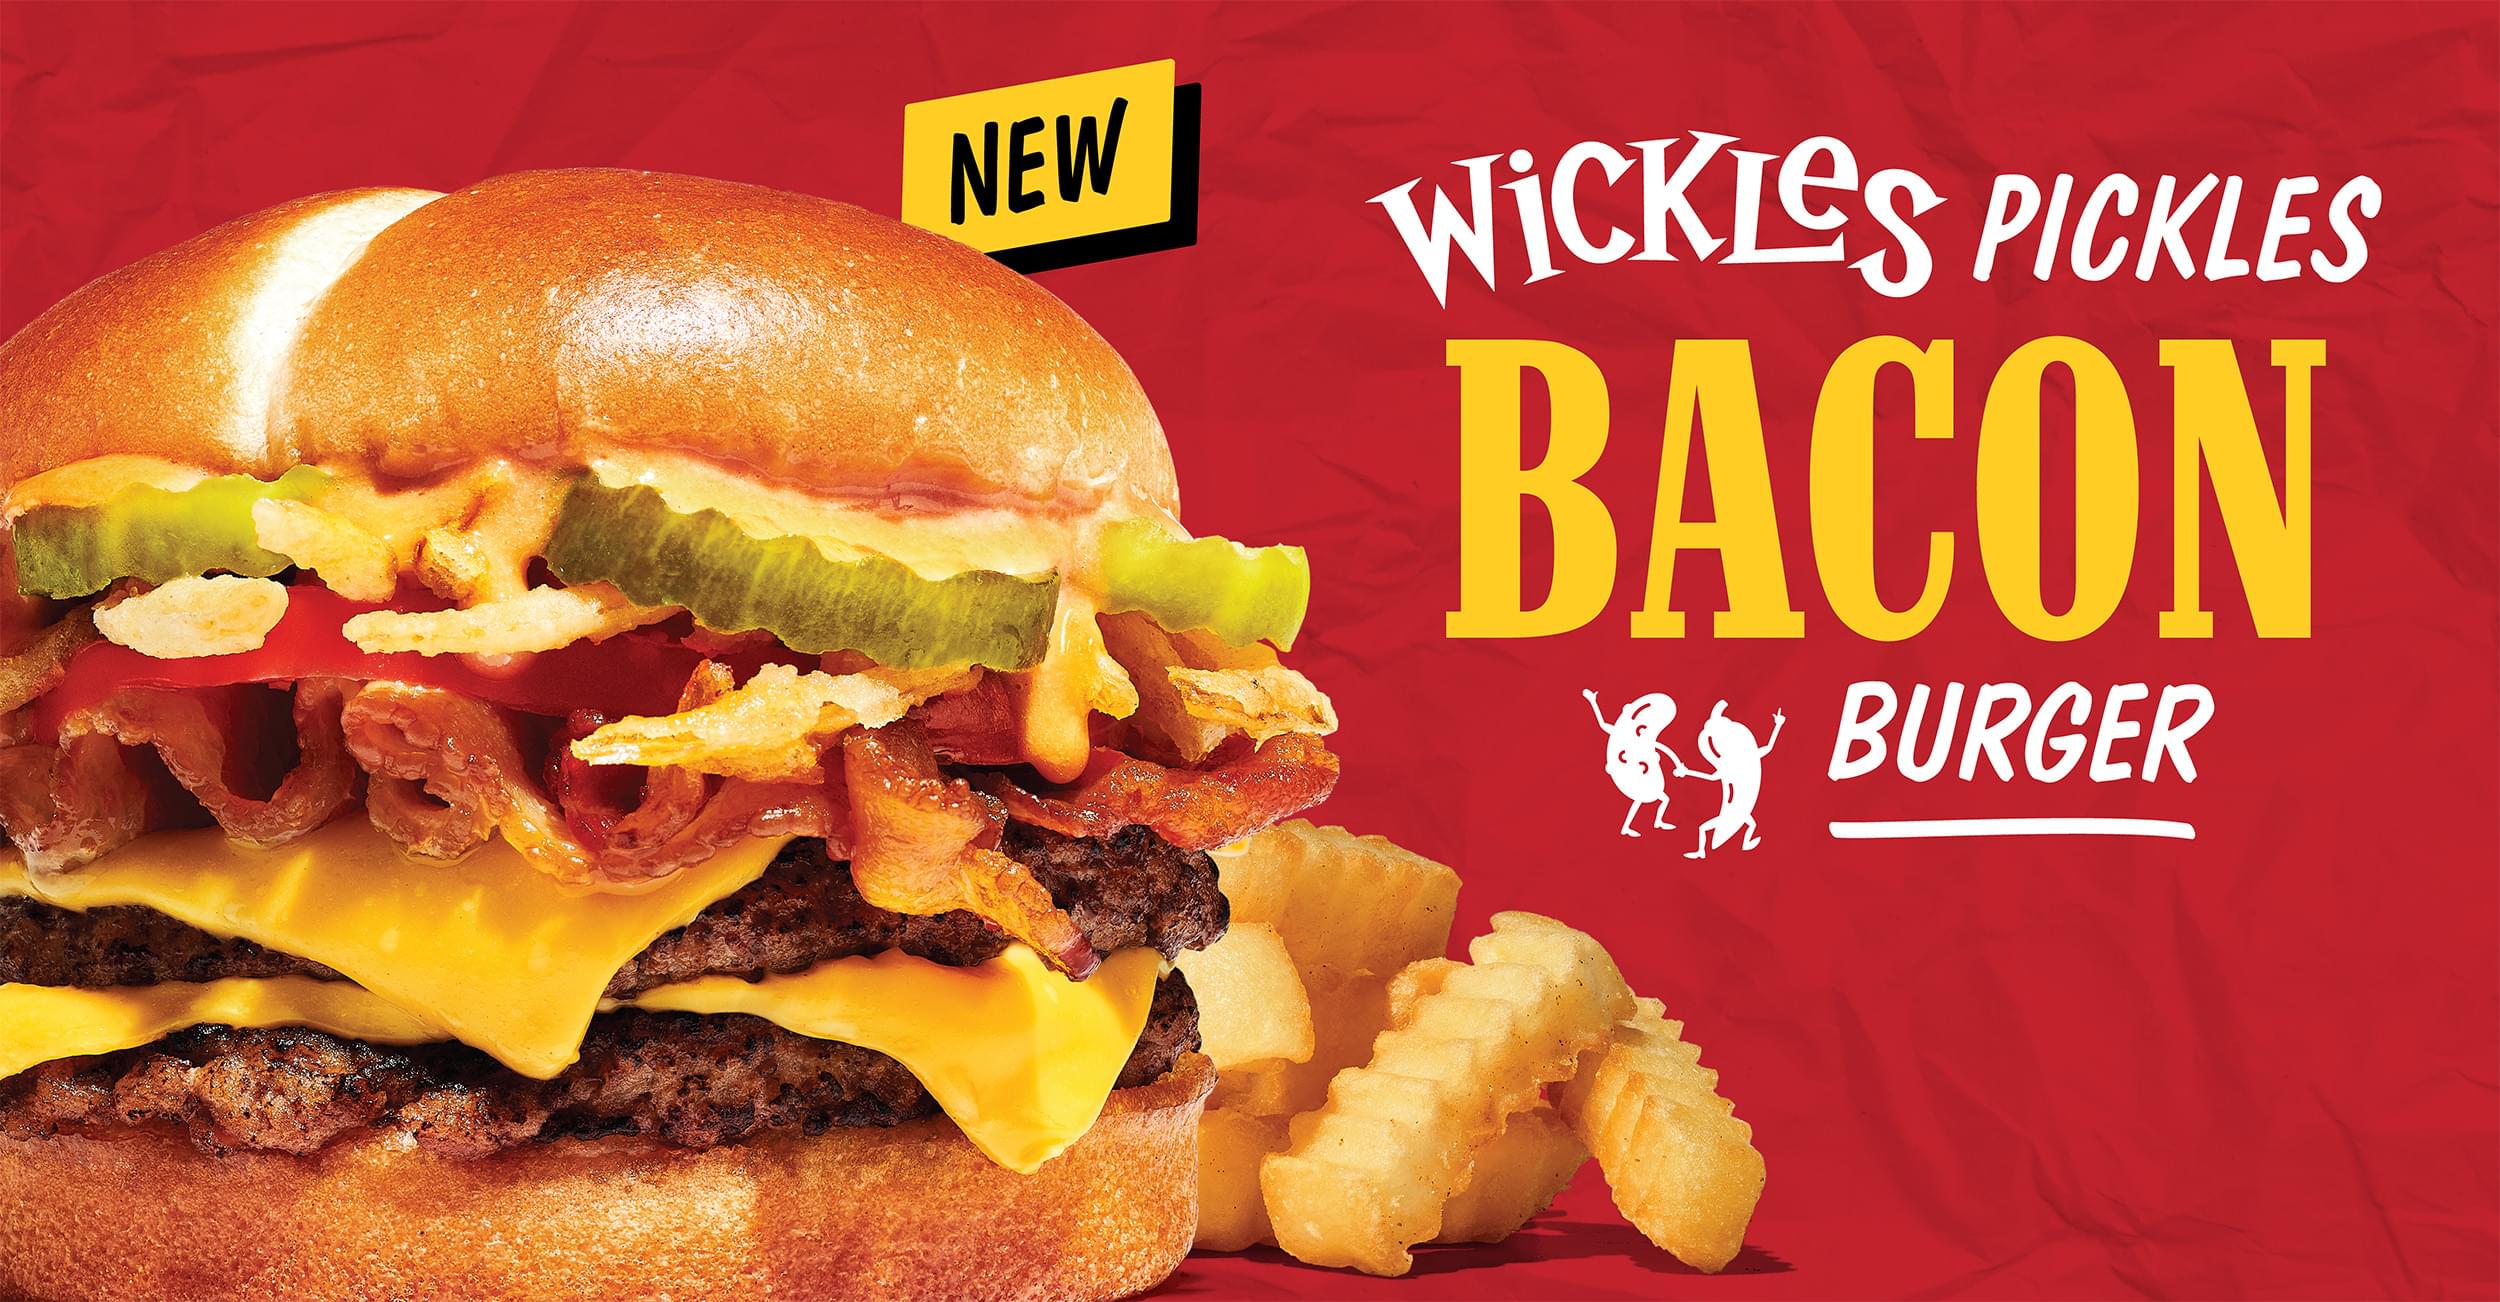 Wickles Pickles Bacon Burger